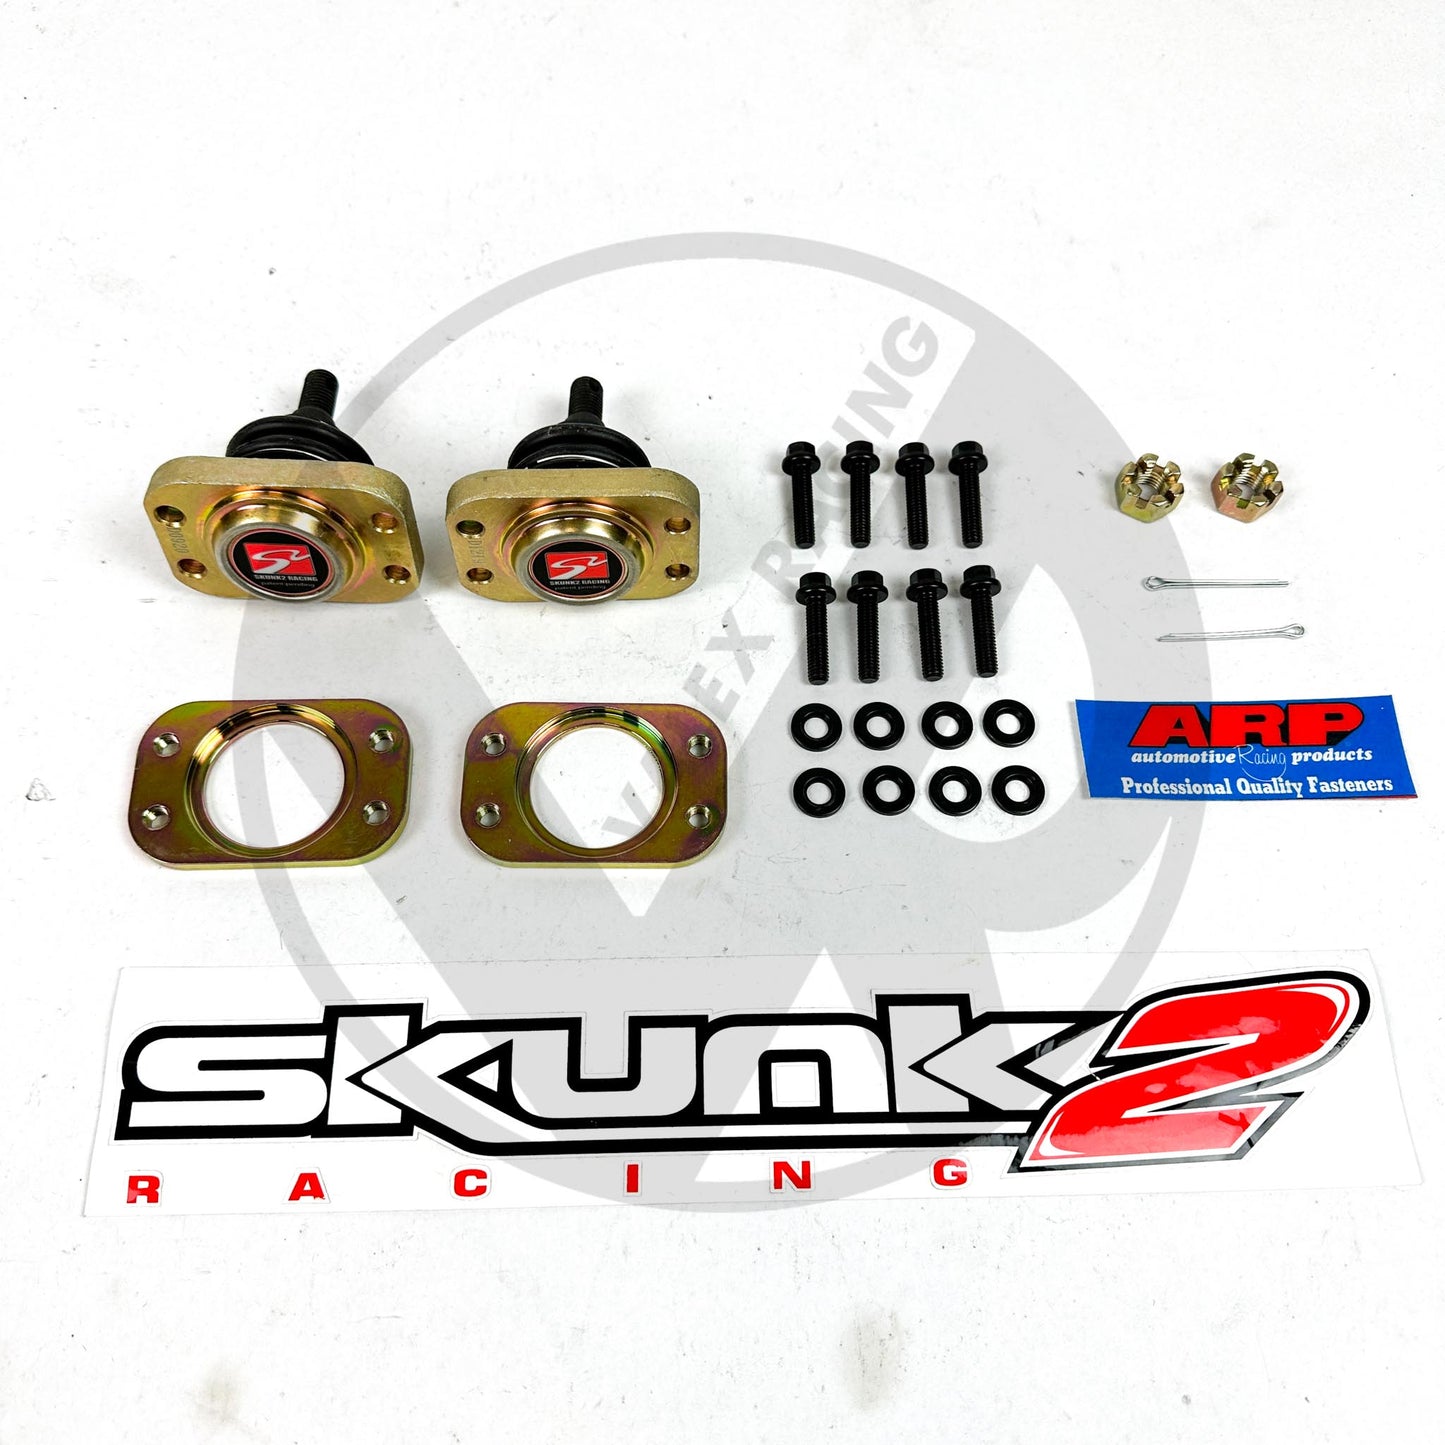 Skunk2 Pro Series FRONT & Rev REAR Camber Kit Combo with ARP Bolt Upgrade HONDA CIVIC 92-95